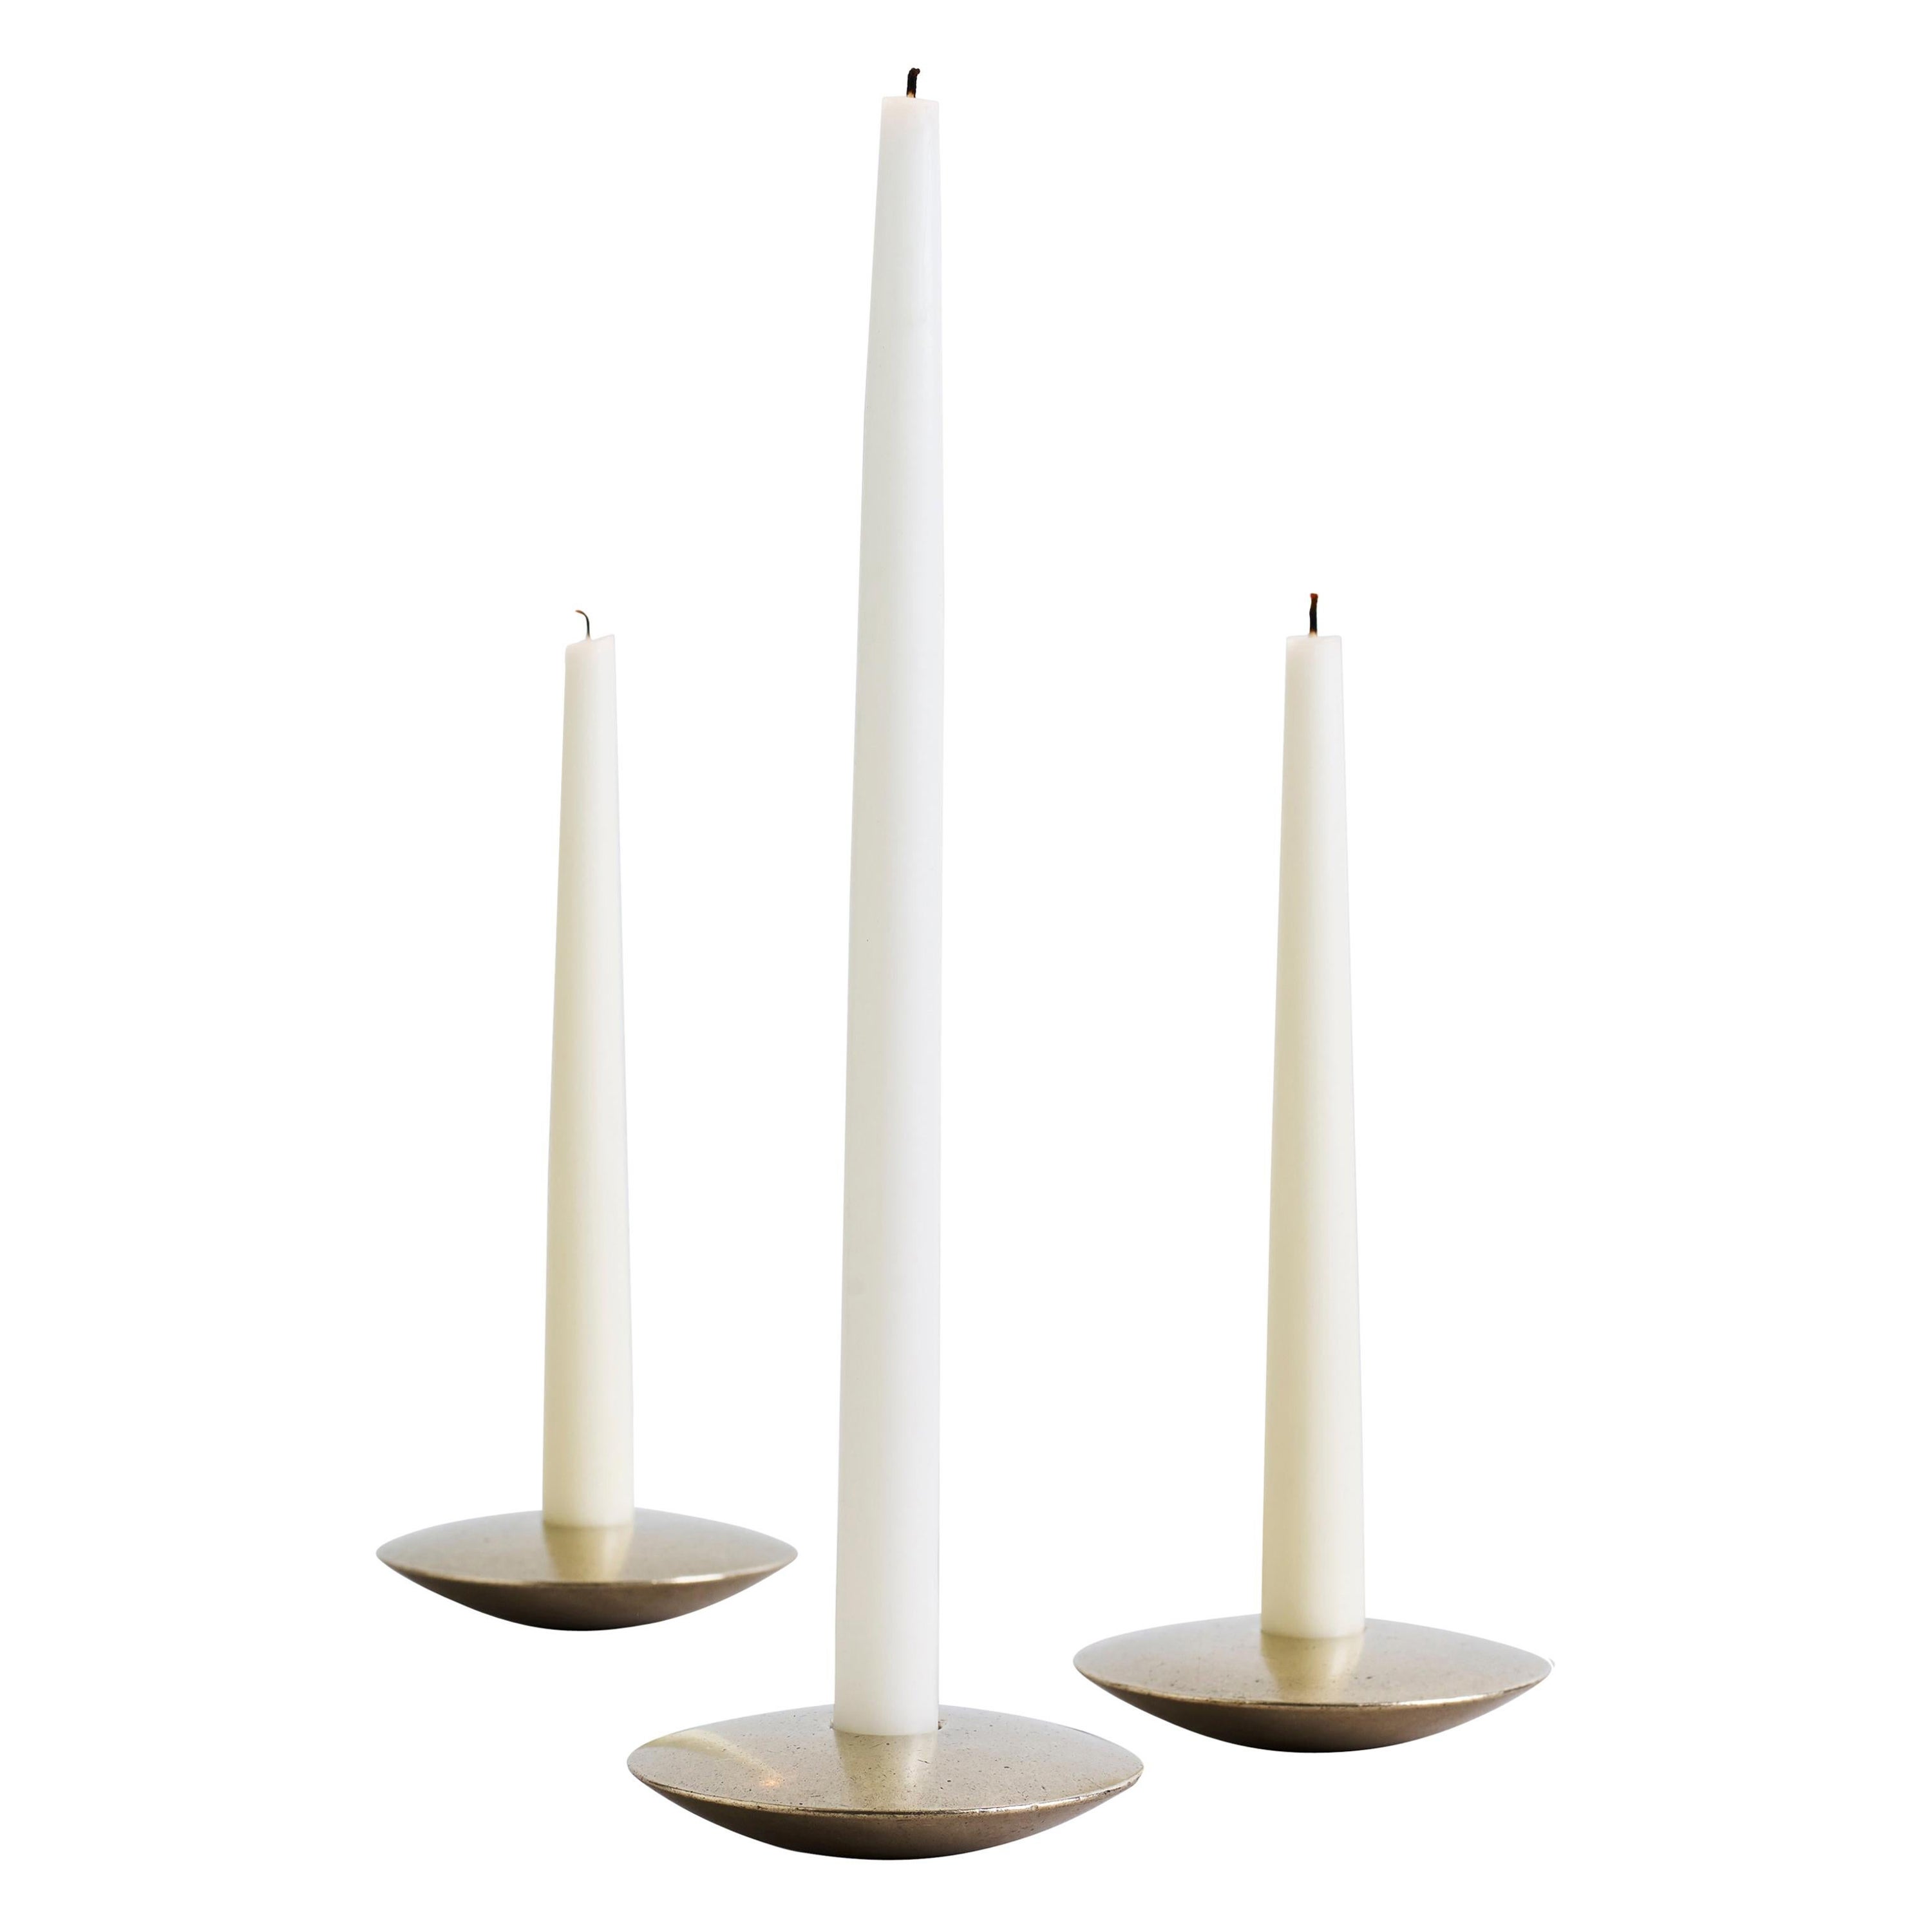 Set of 3 Almendres Candle Holders by Henry Wilson